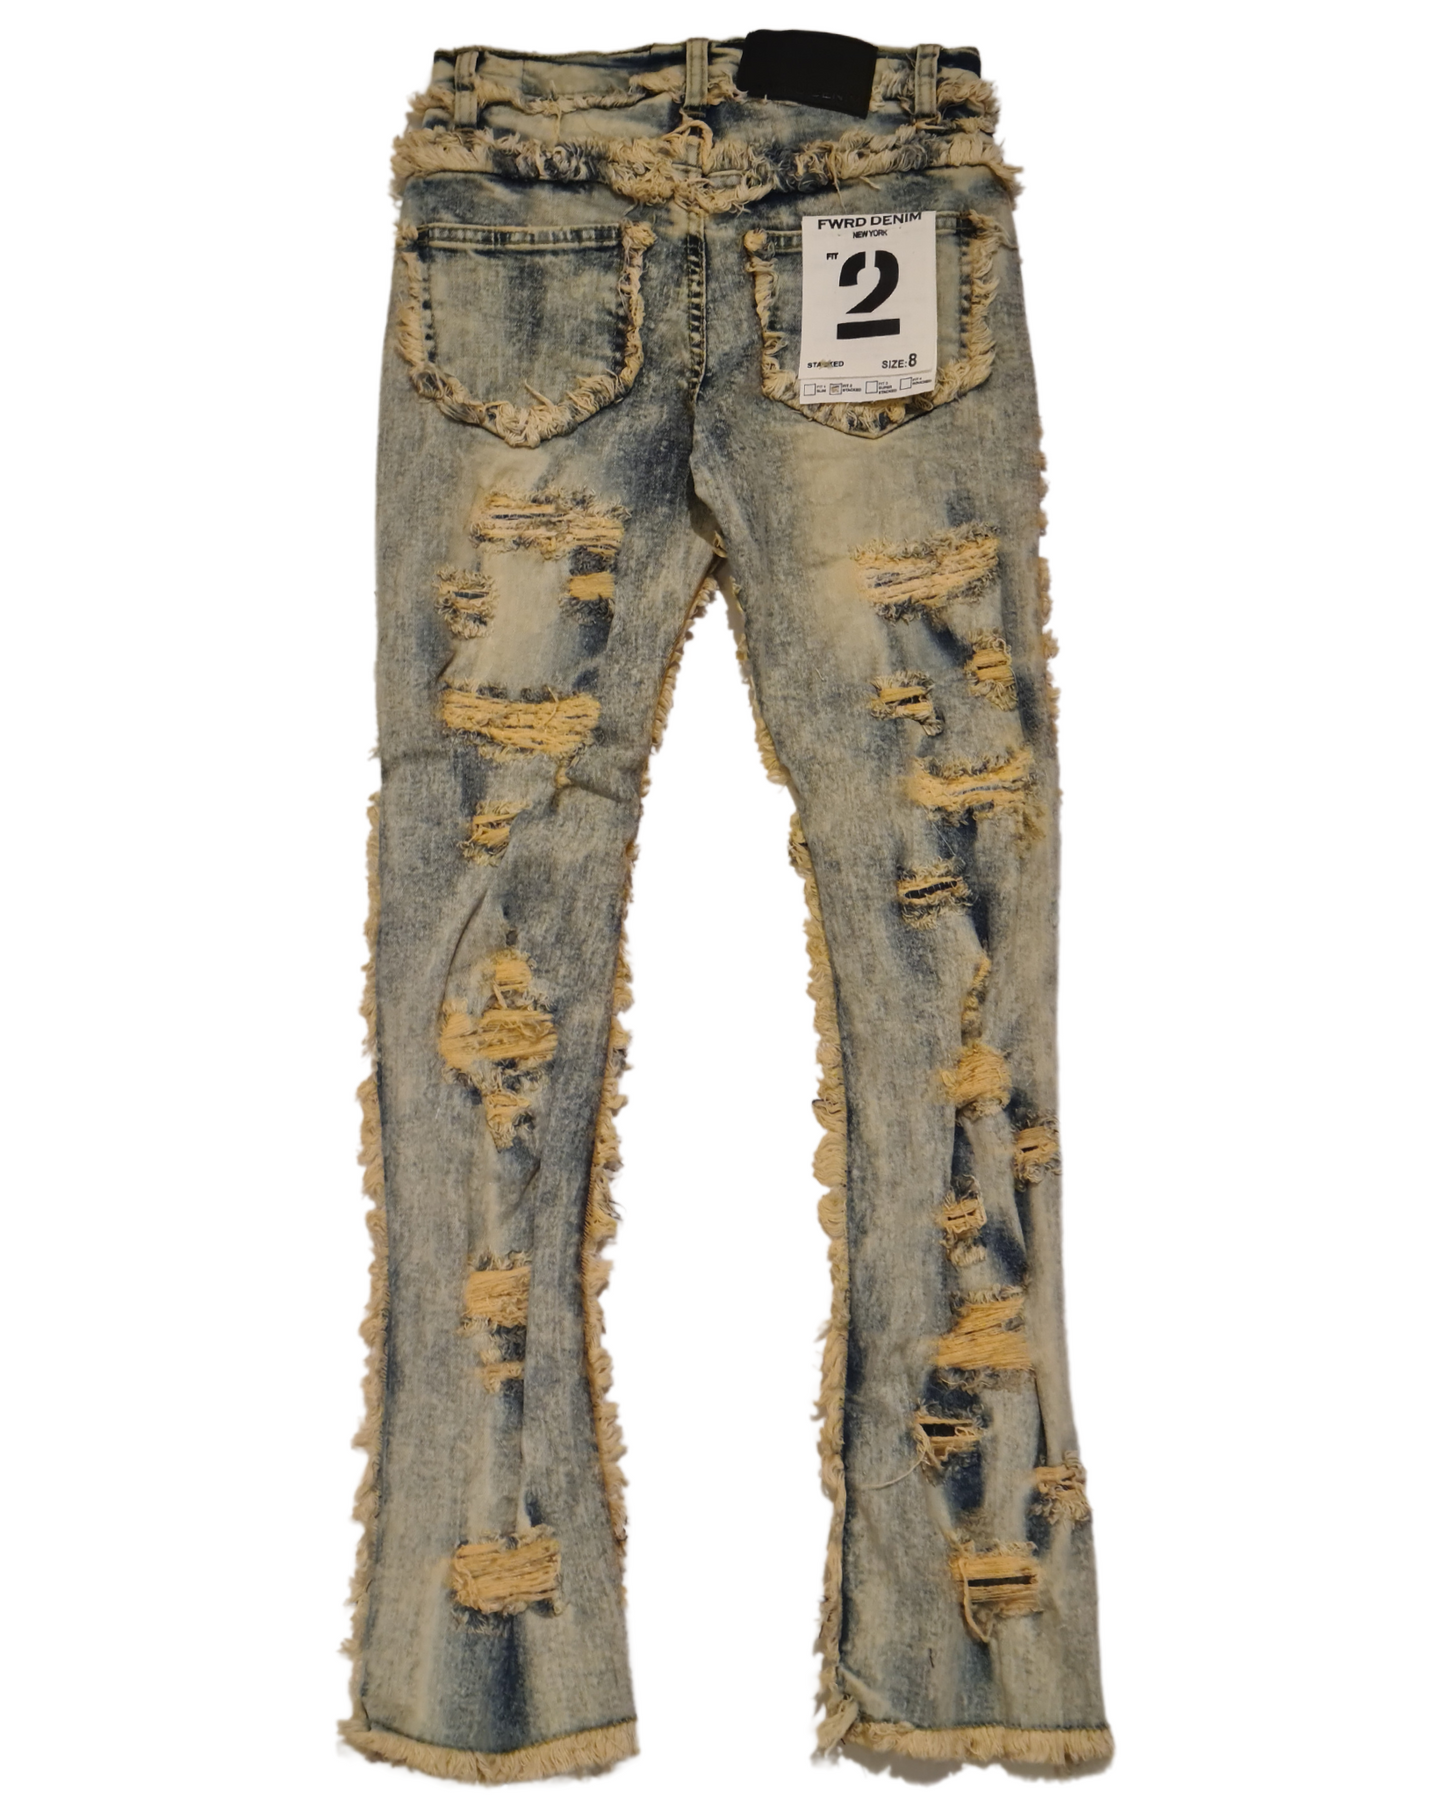 Kids Stacked Jeans 330104